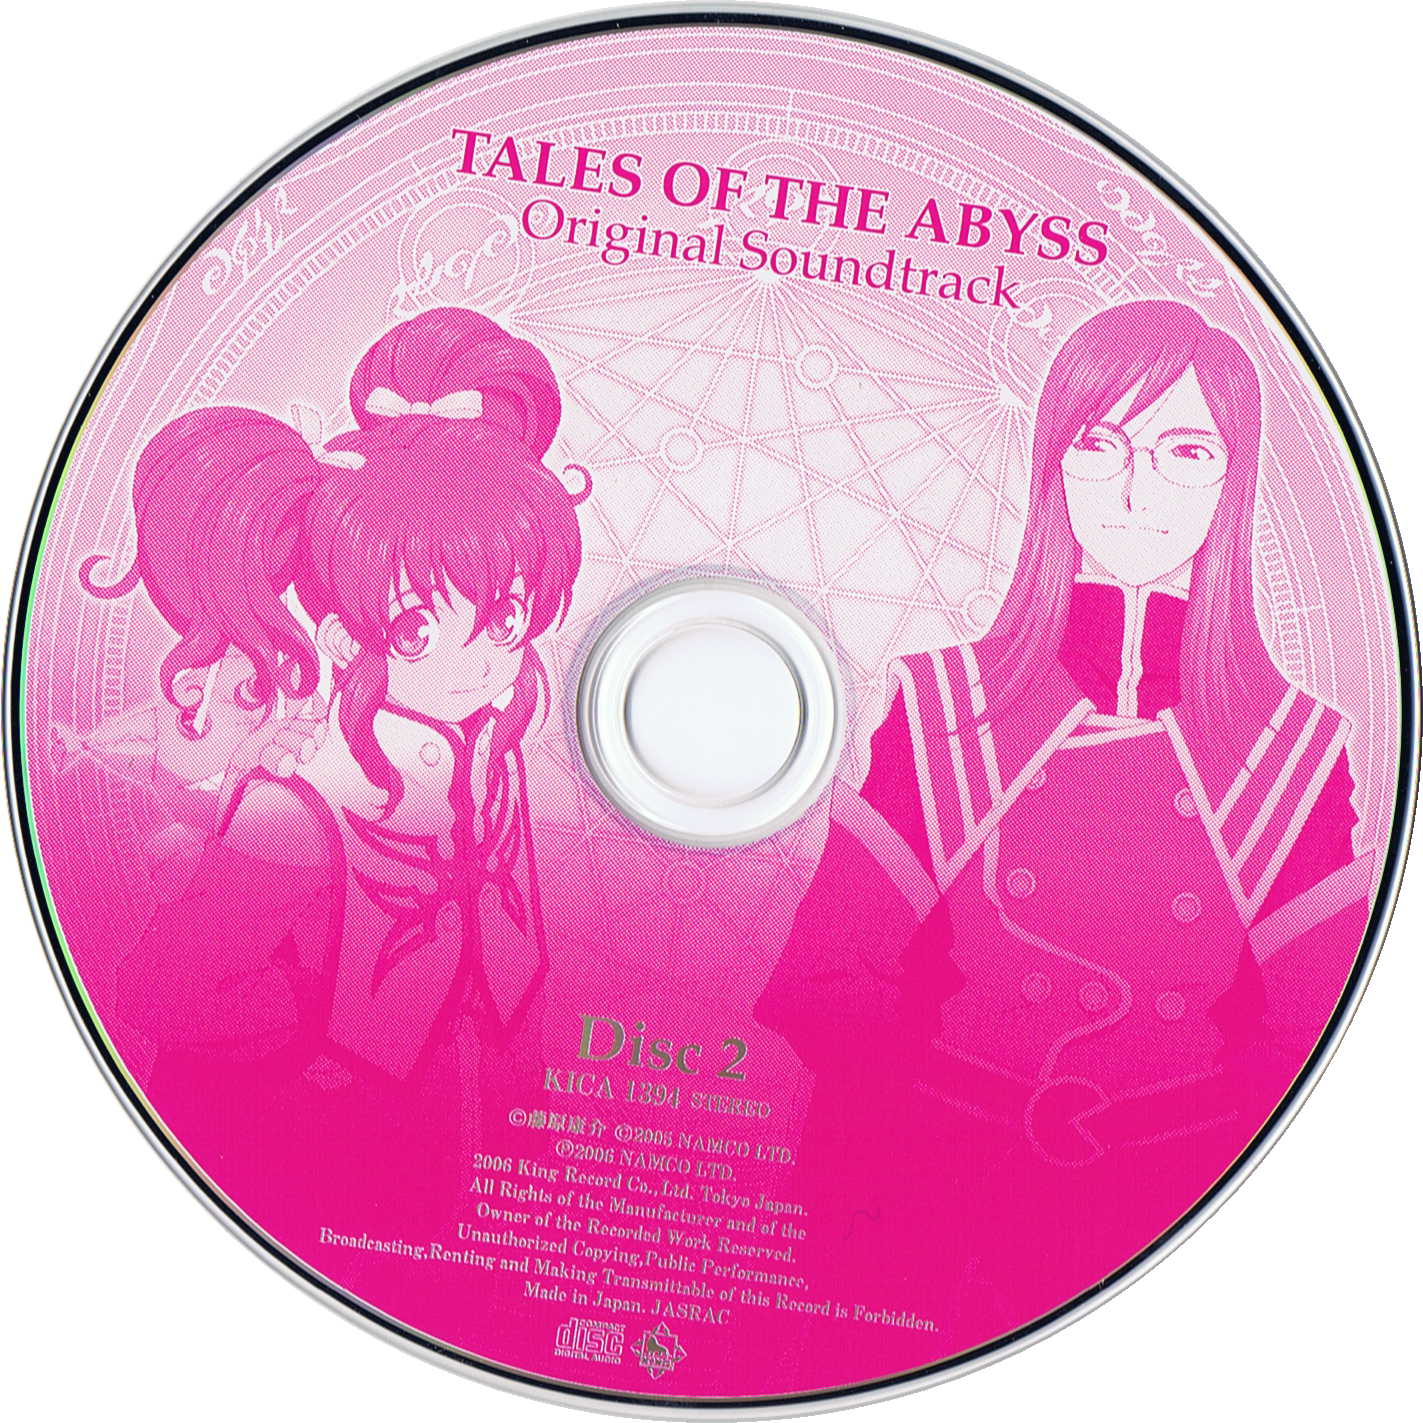 Tales of the Abyss Original Soundtrack (2006) MP3 - Download Tales of the  Abyss Original Soundtrack (2006) Soundtracks for FREE!